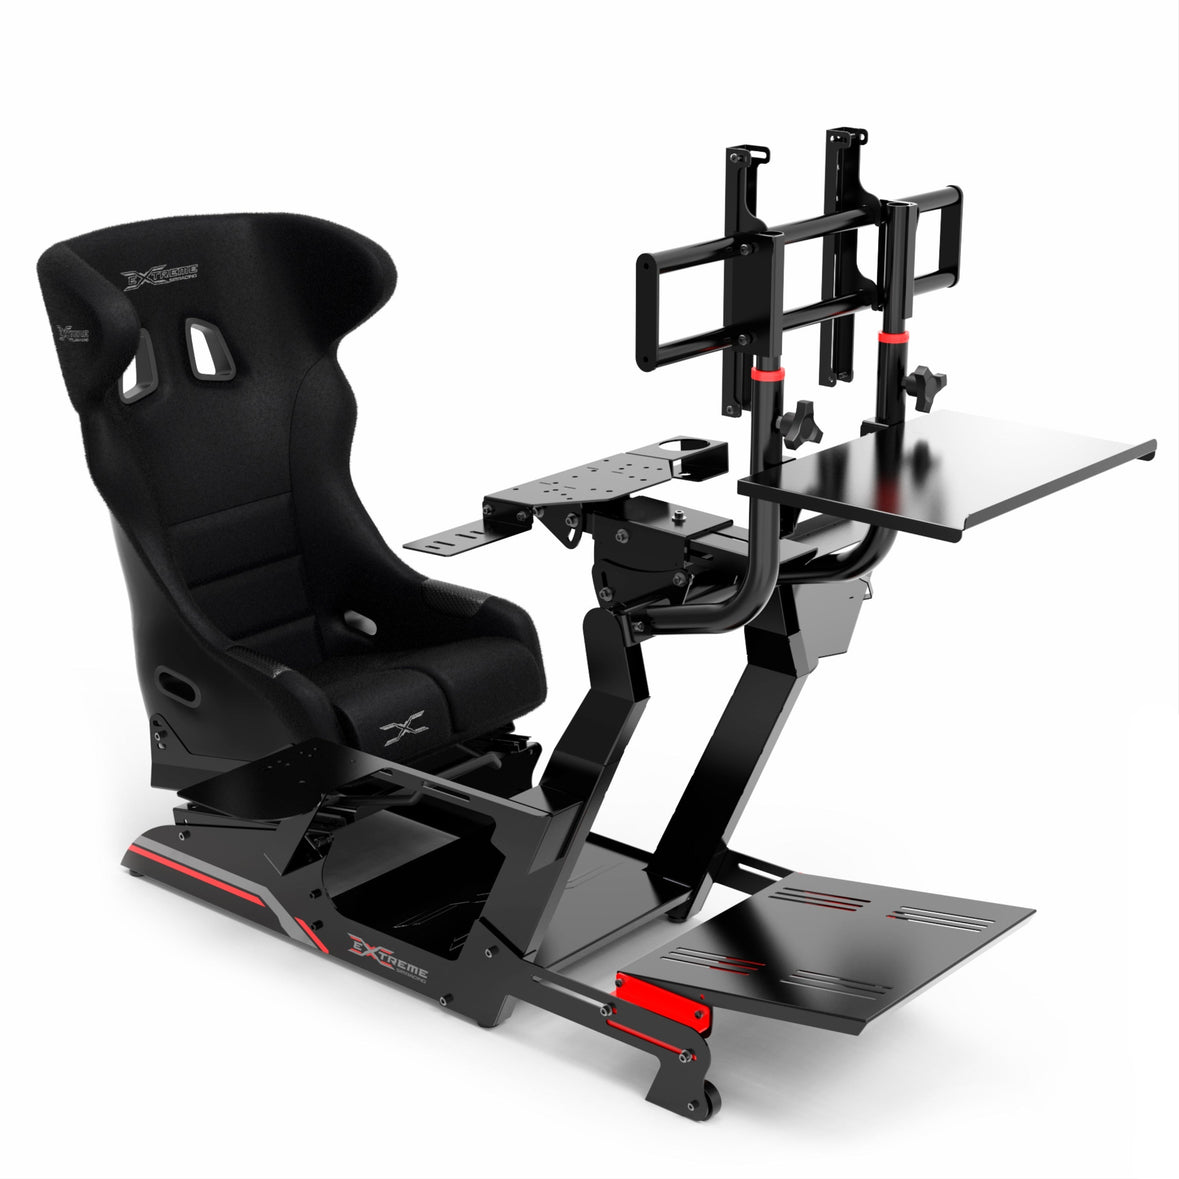 Extreme SimRacing Cockpit XT Premium 3.0 Fully Accessorized — FAST RACER